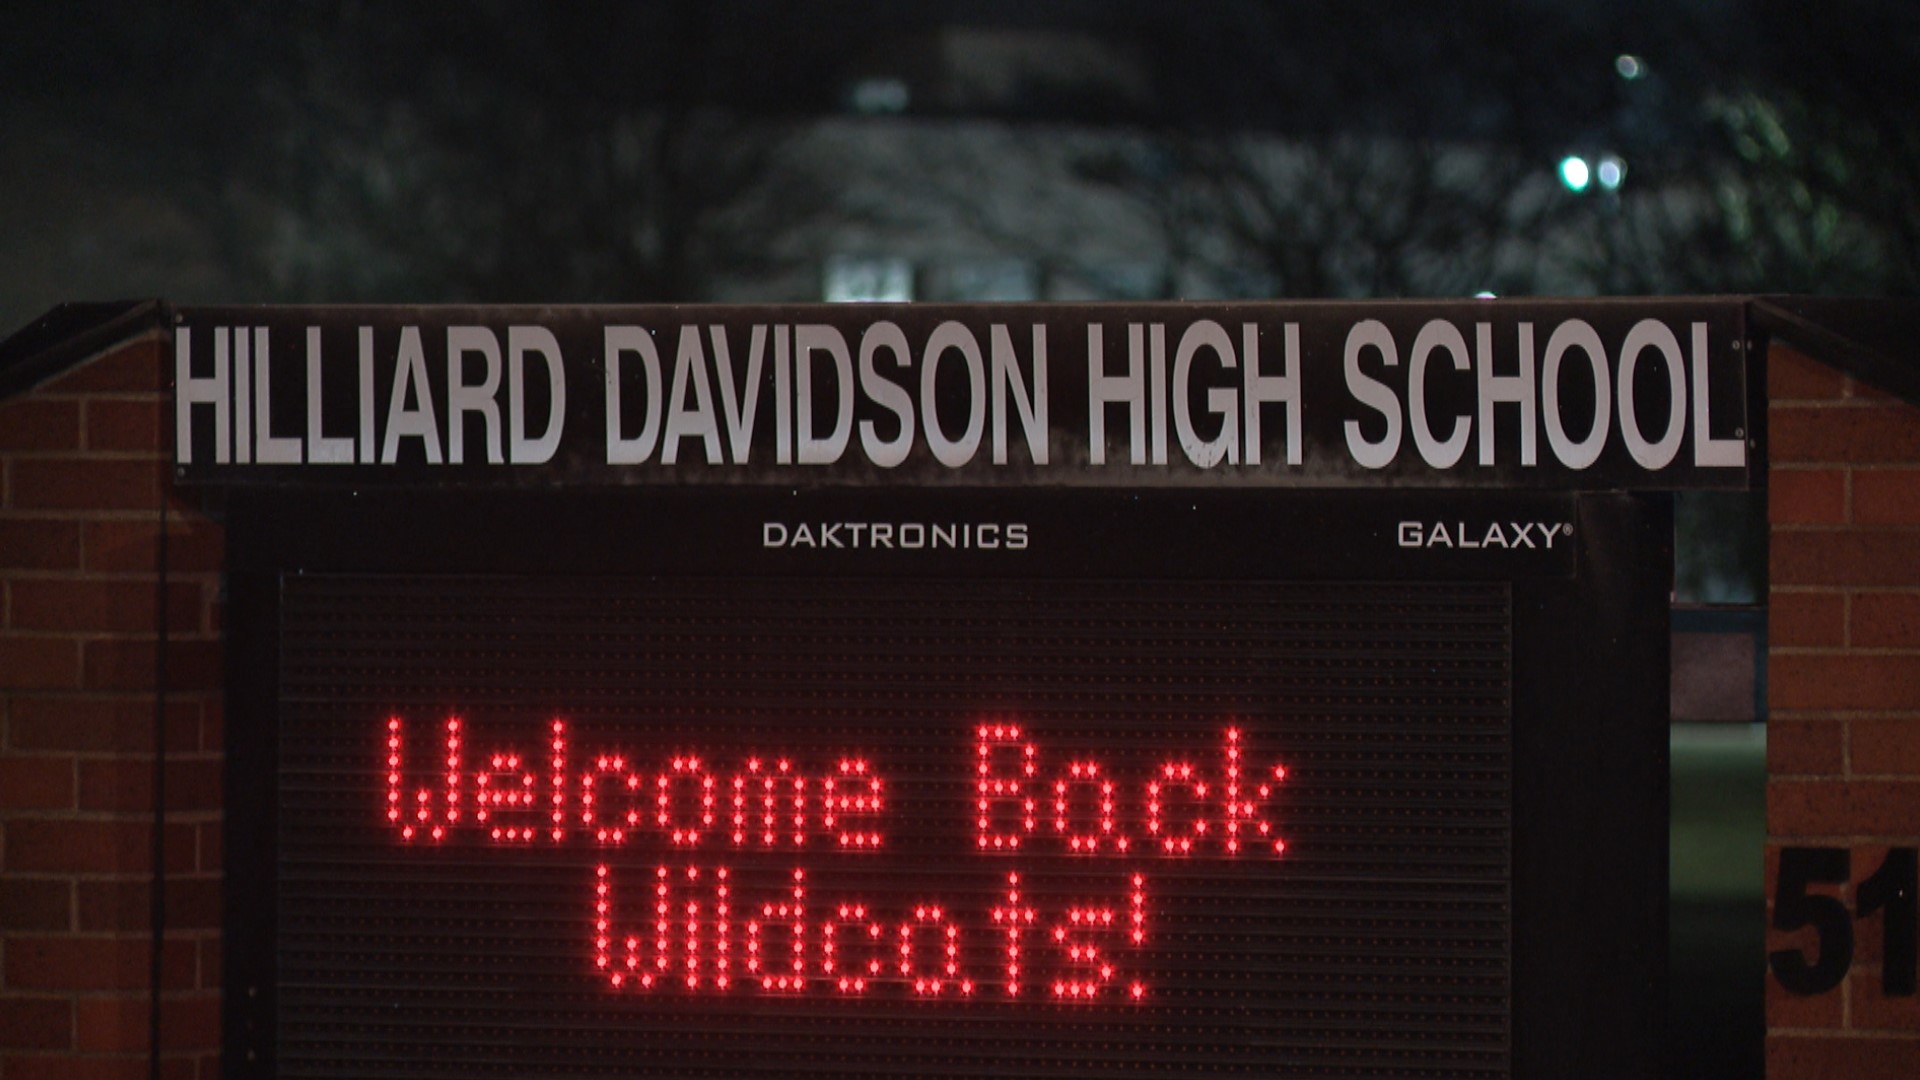 Two 15-year-old Hilliard students are now facing charges after allegedly posting threatening messages to social media.